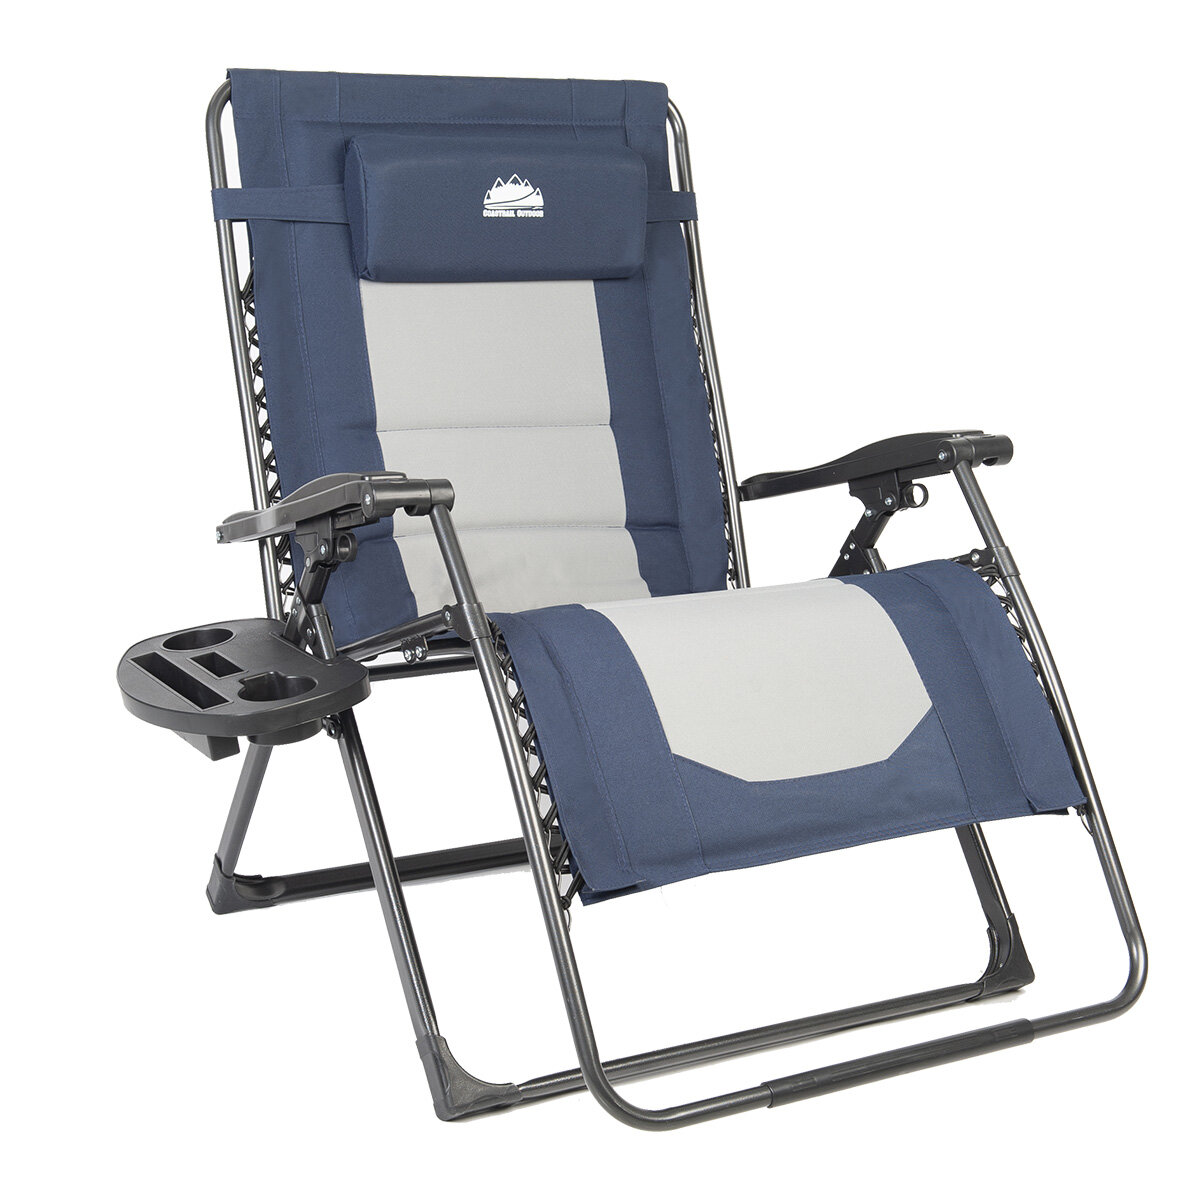 Upgraded Zero Gravity Folding Chaise Lounge Chair Portable Reclining Recliner US